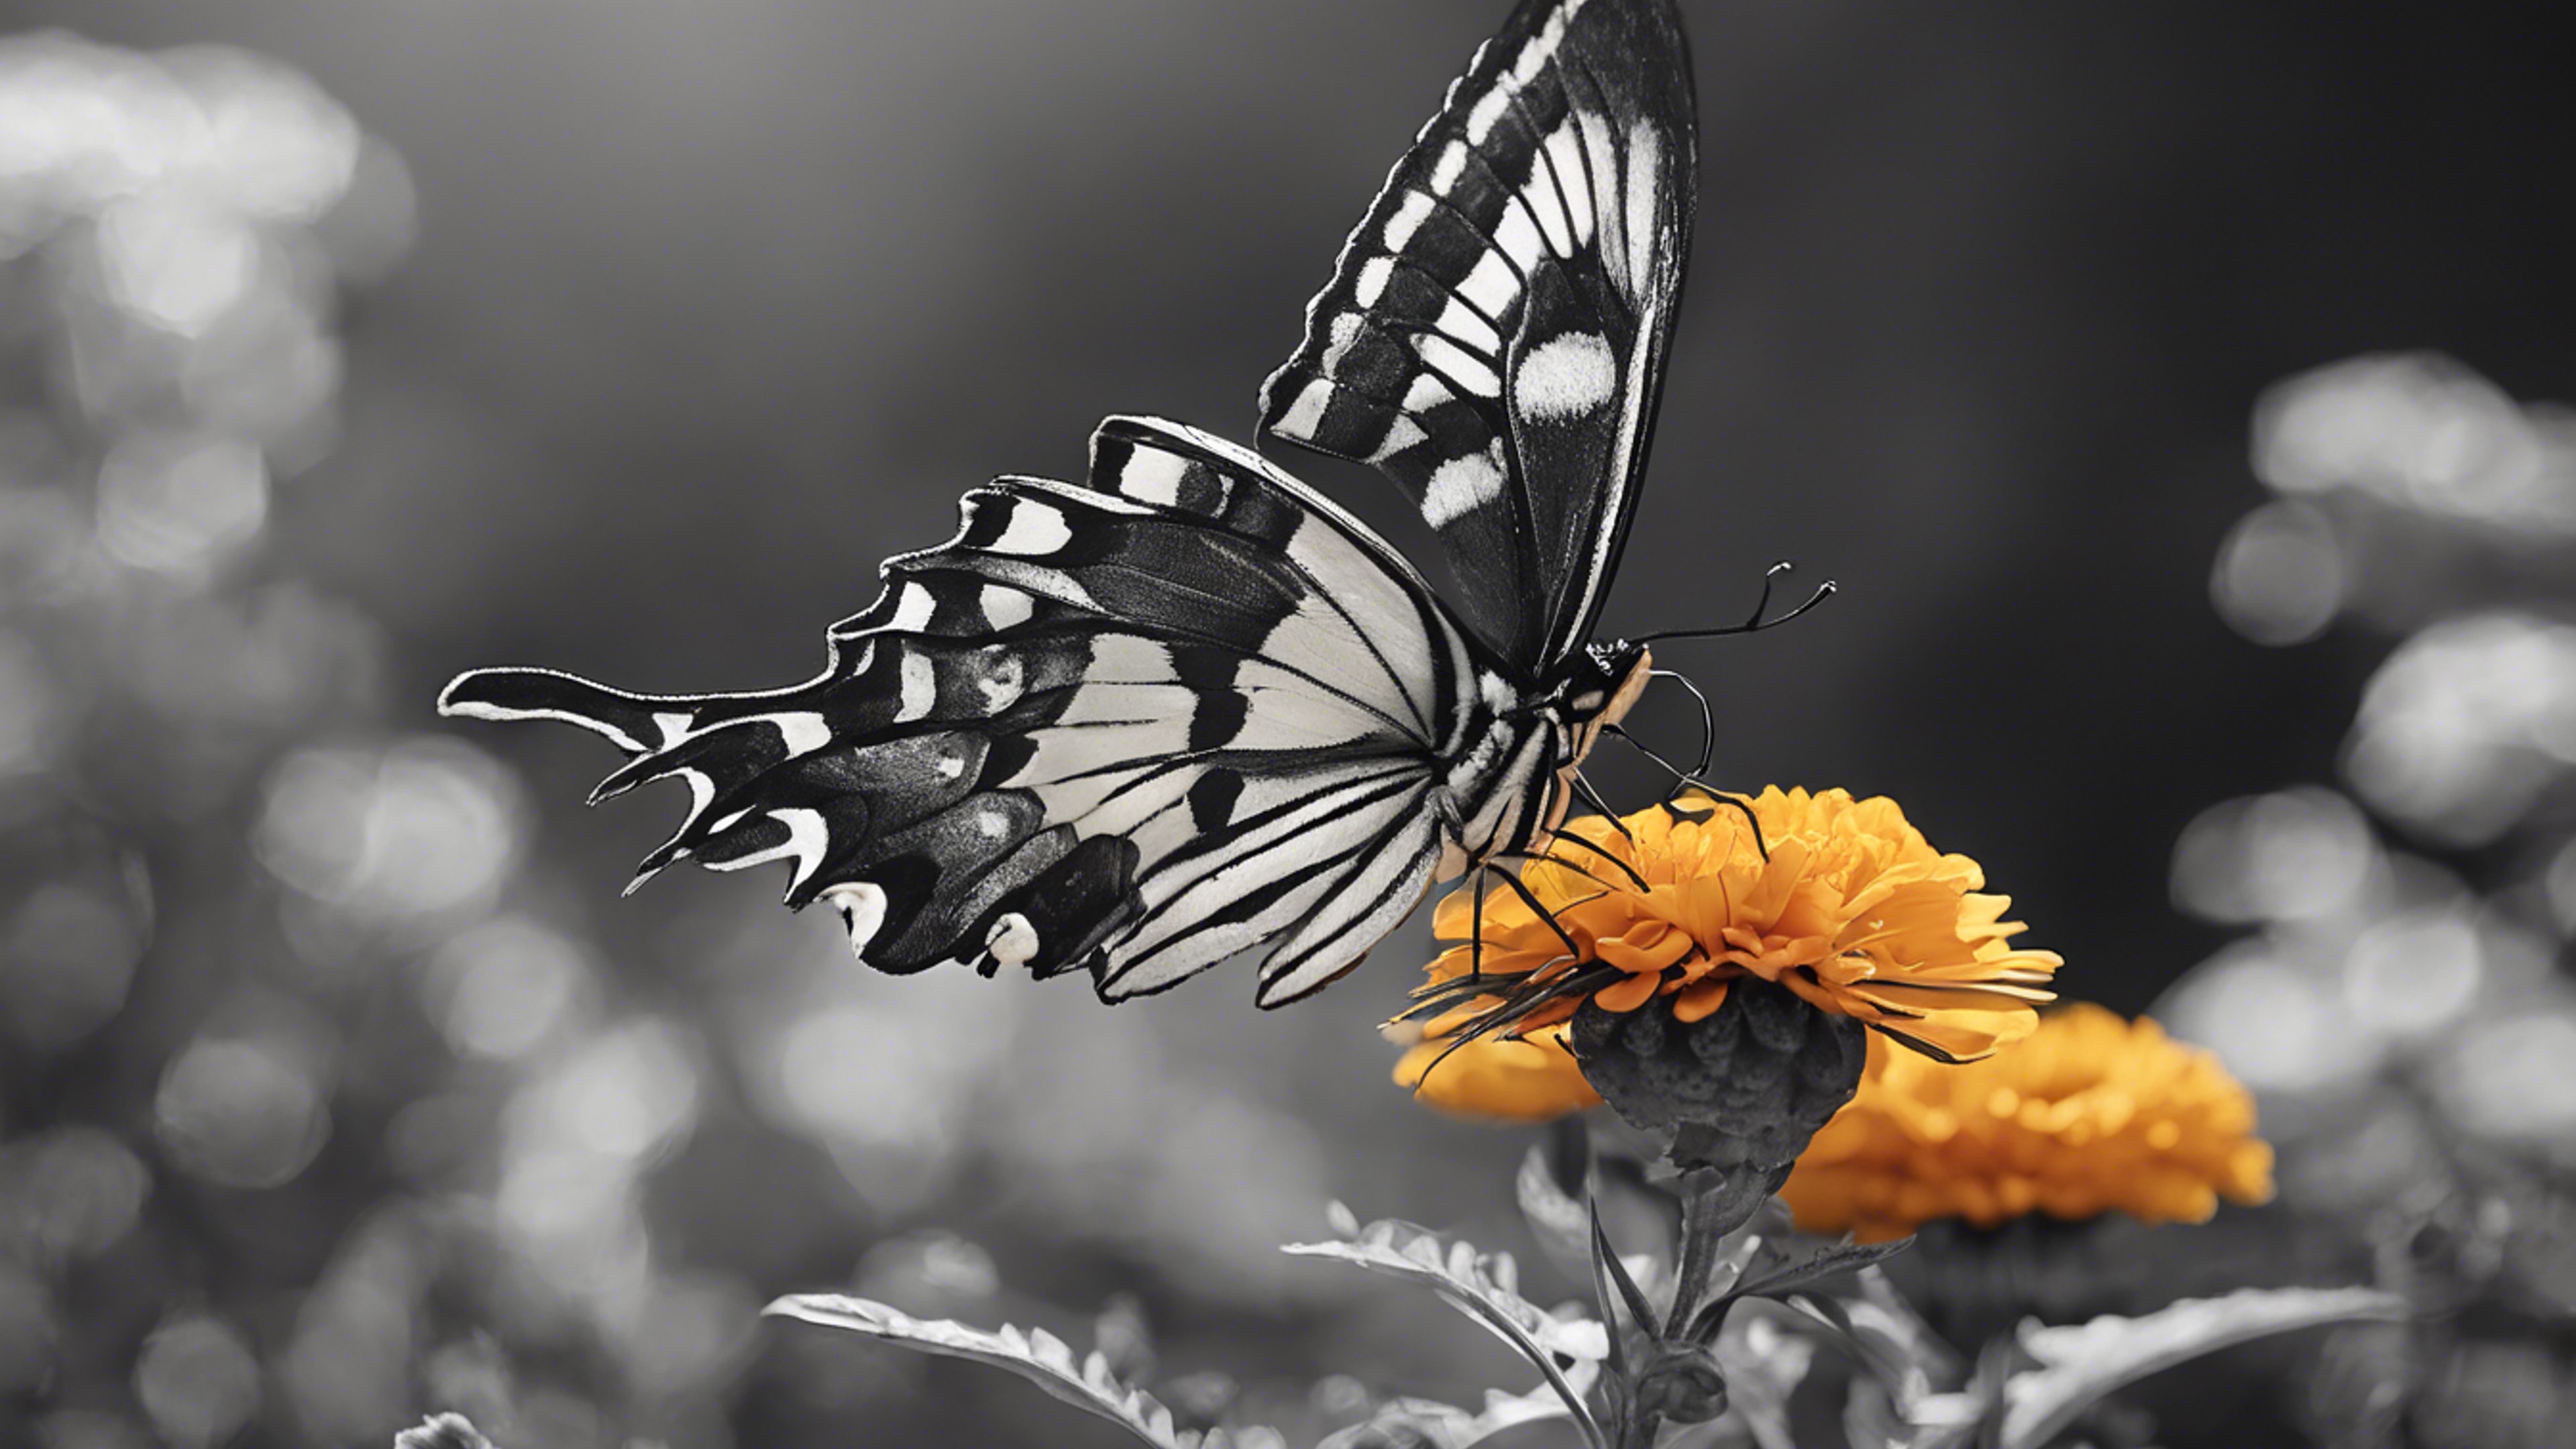 Elegant black and white swallowtail butterfly alighting on a marigold.壁紙[6facdb7606974c379ad5]